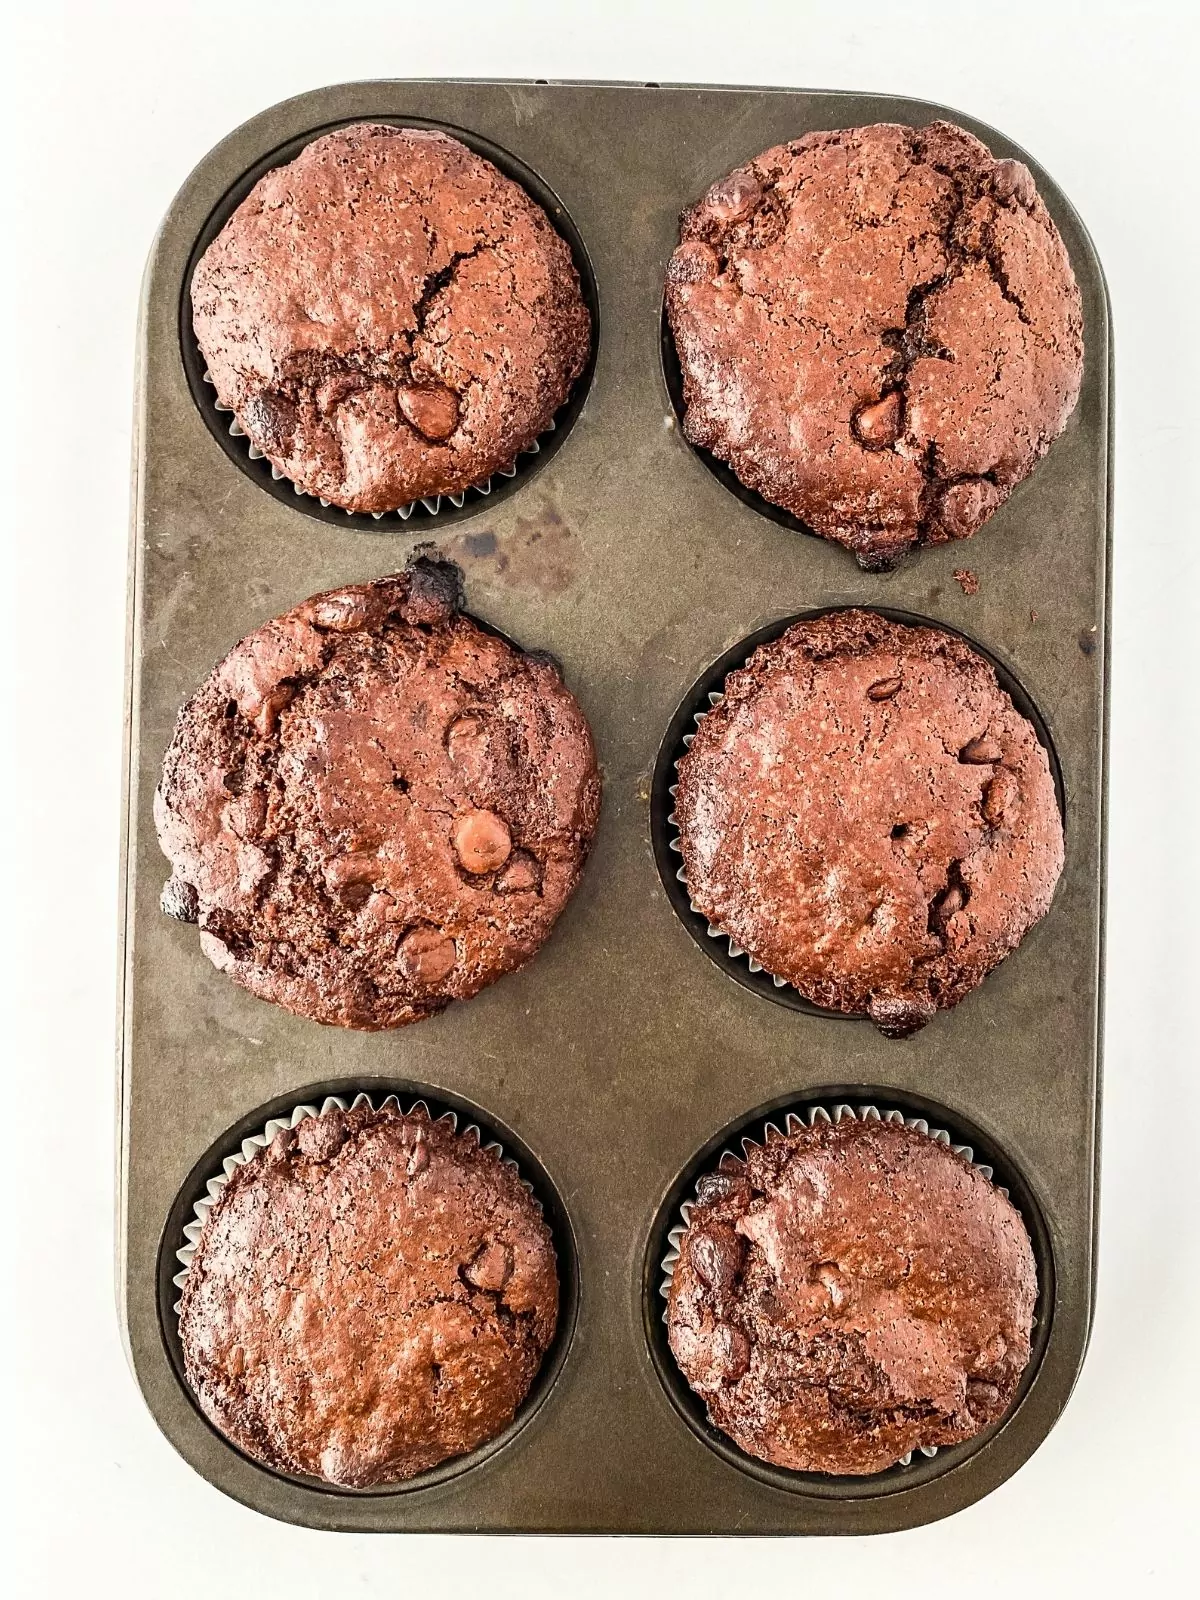 baked muffins in muffin pan.